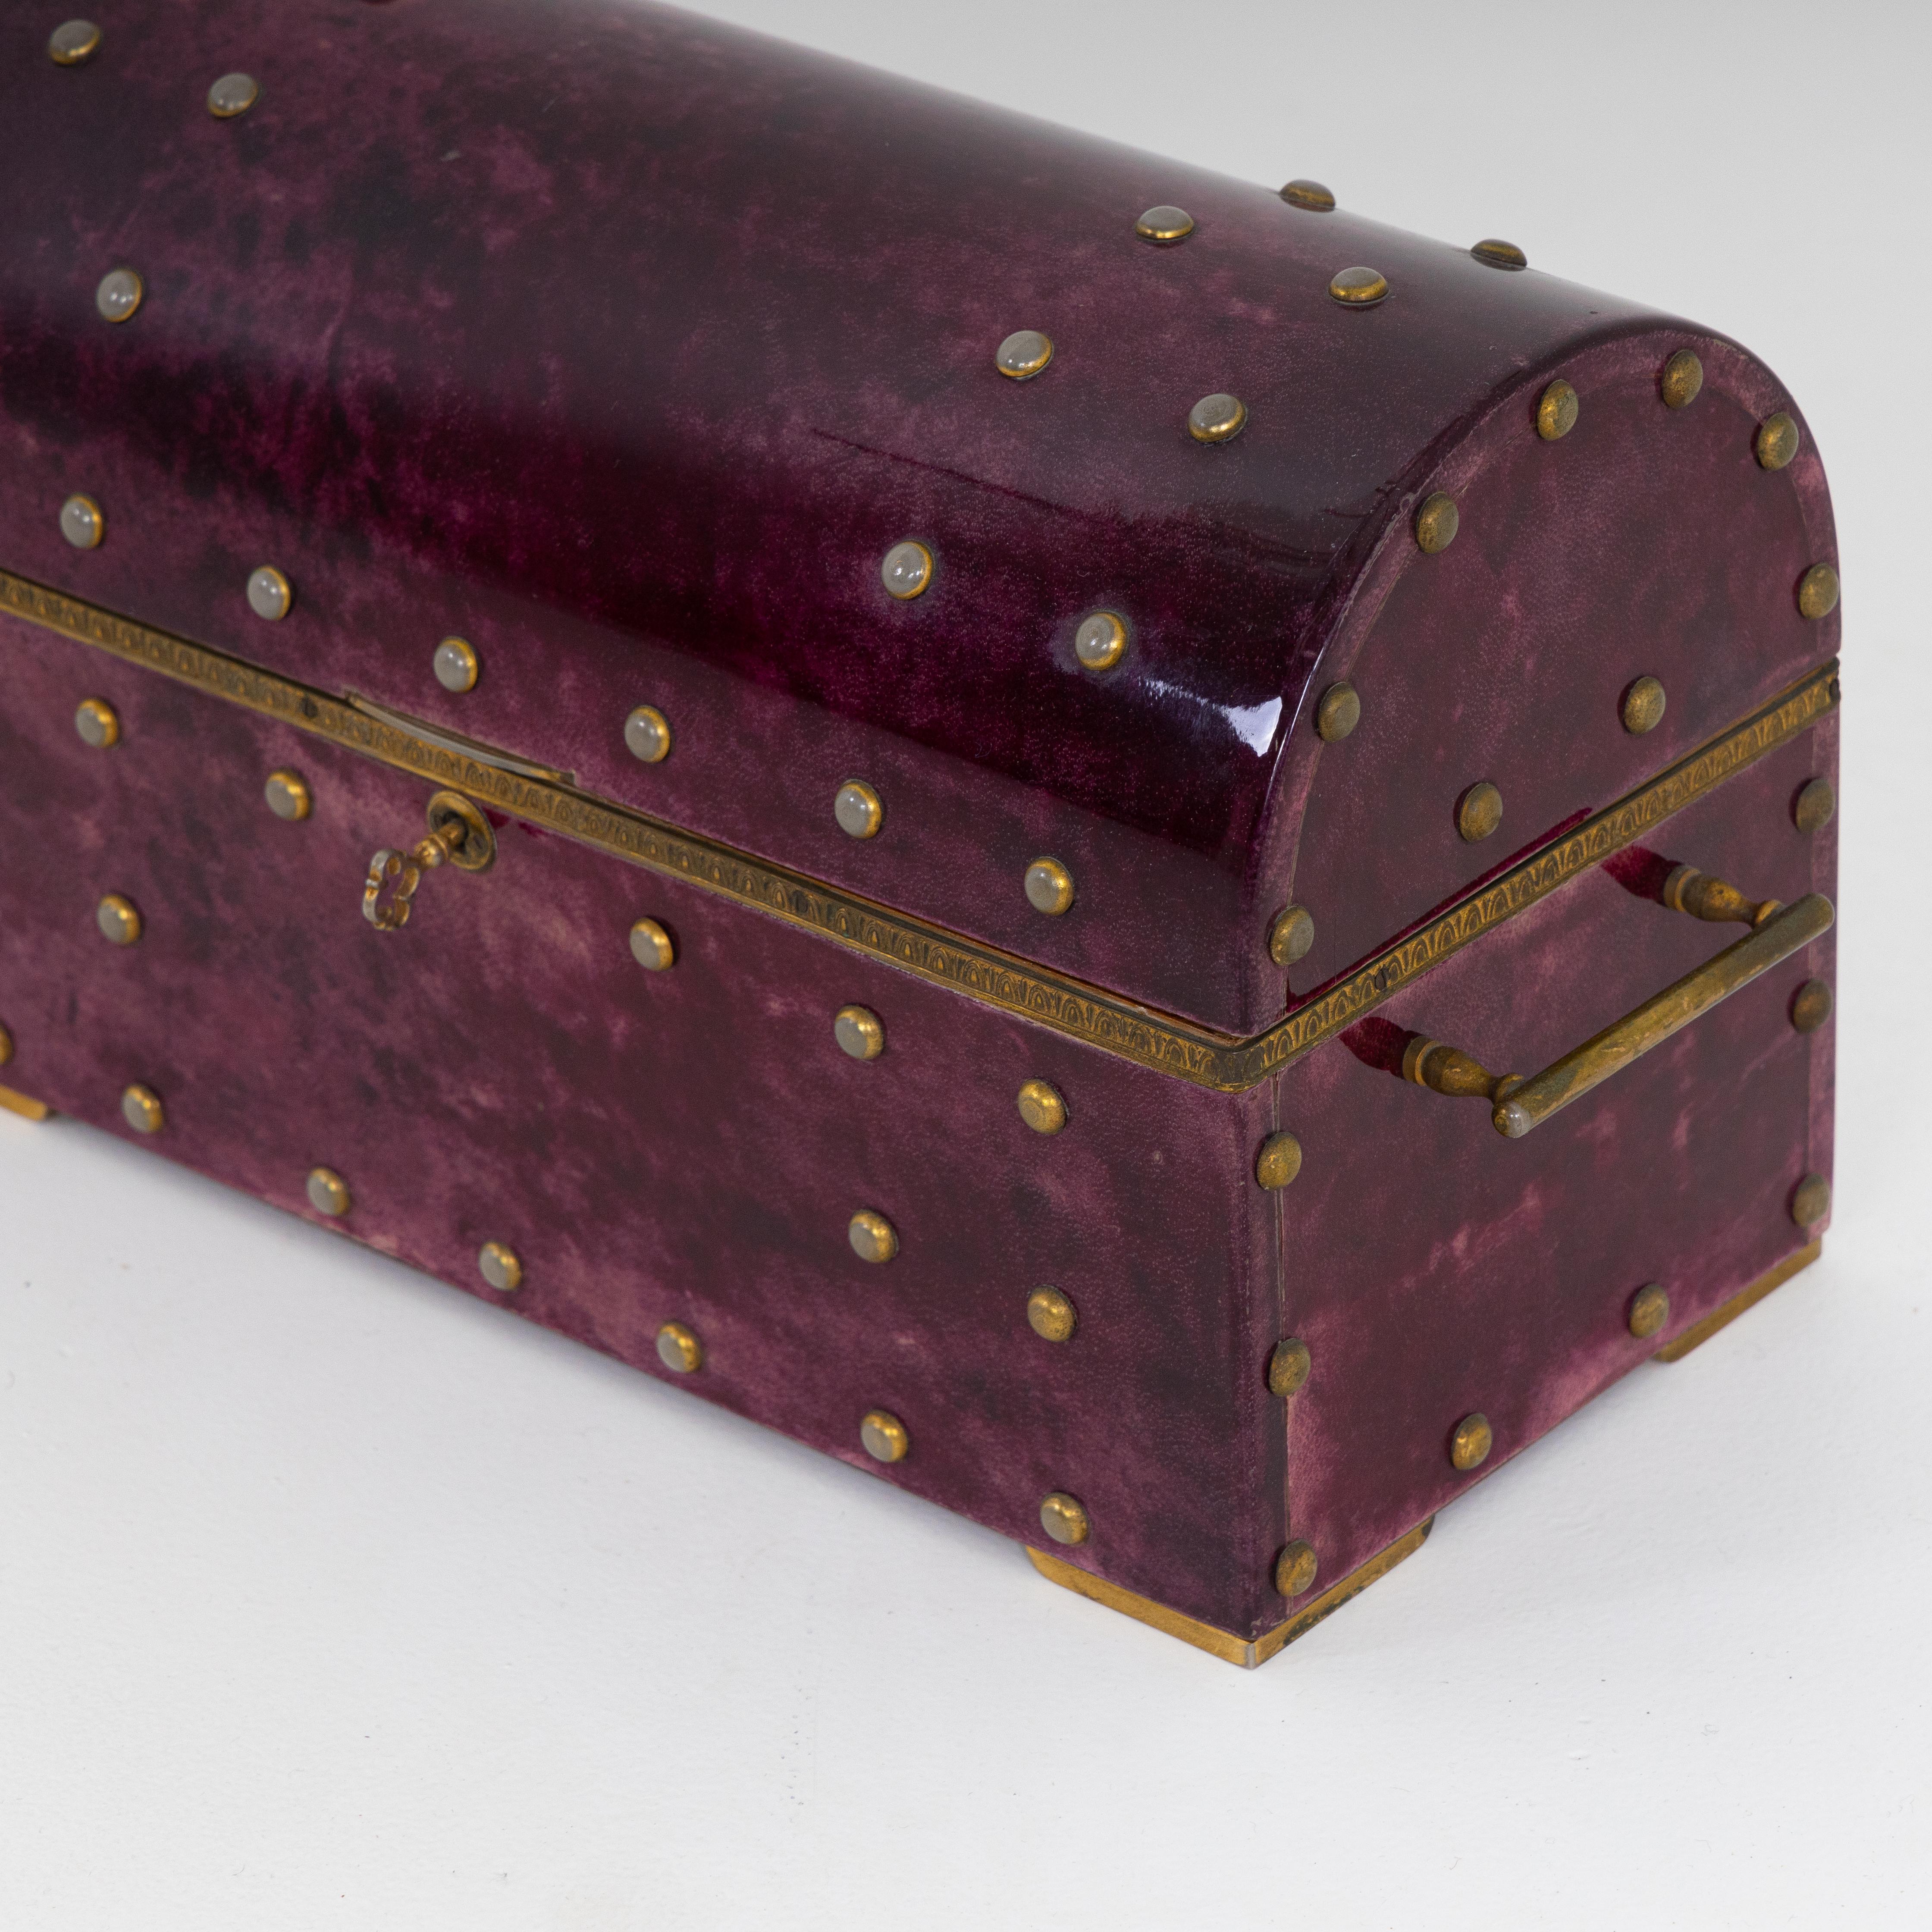 Aldo Tura designed goatskin box. Lacquered goatskin and brass details.
Incudes some vintage cards and chess pieces.